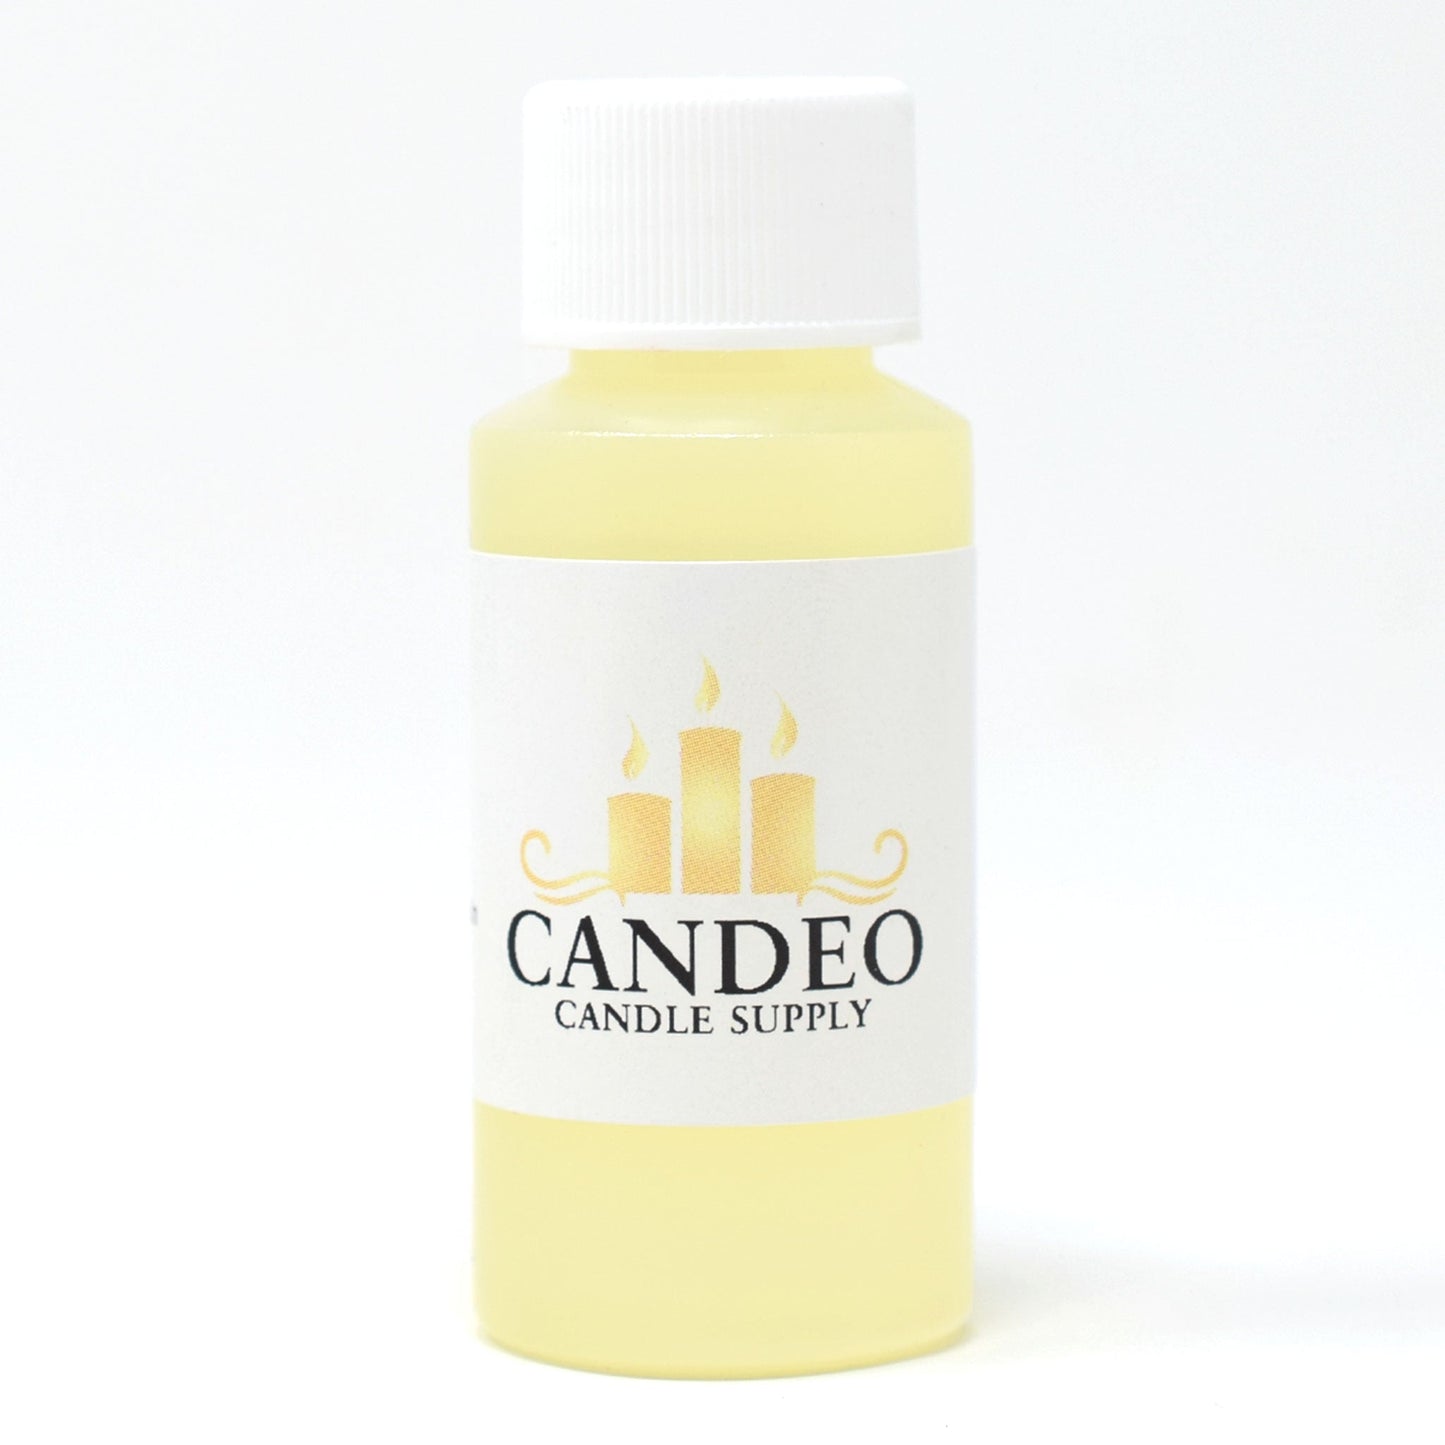 Seaside Woods Fragrance Oil - Candeo Candle Supply